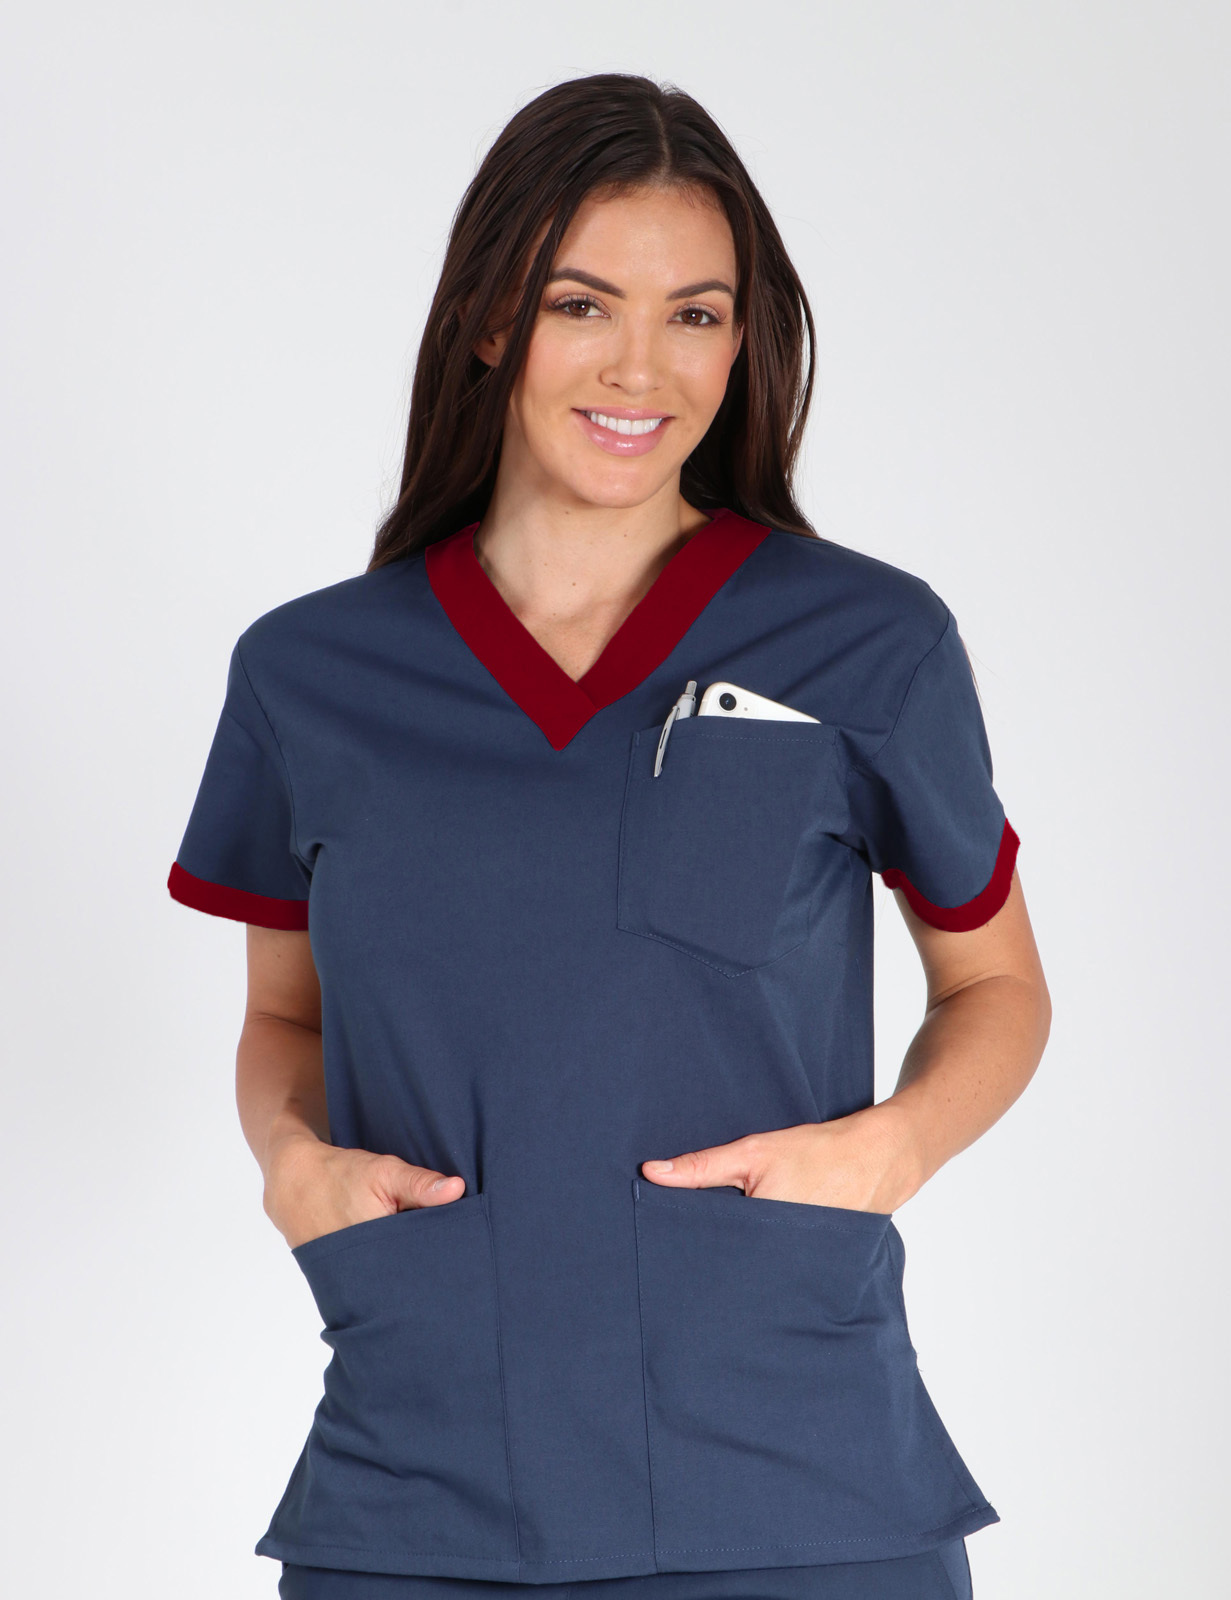 St. John Of God - HDHS (Contrast V-neck Scrub Top in Black with Wine Trim in and Cargo Pants incl Logos)